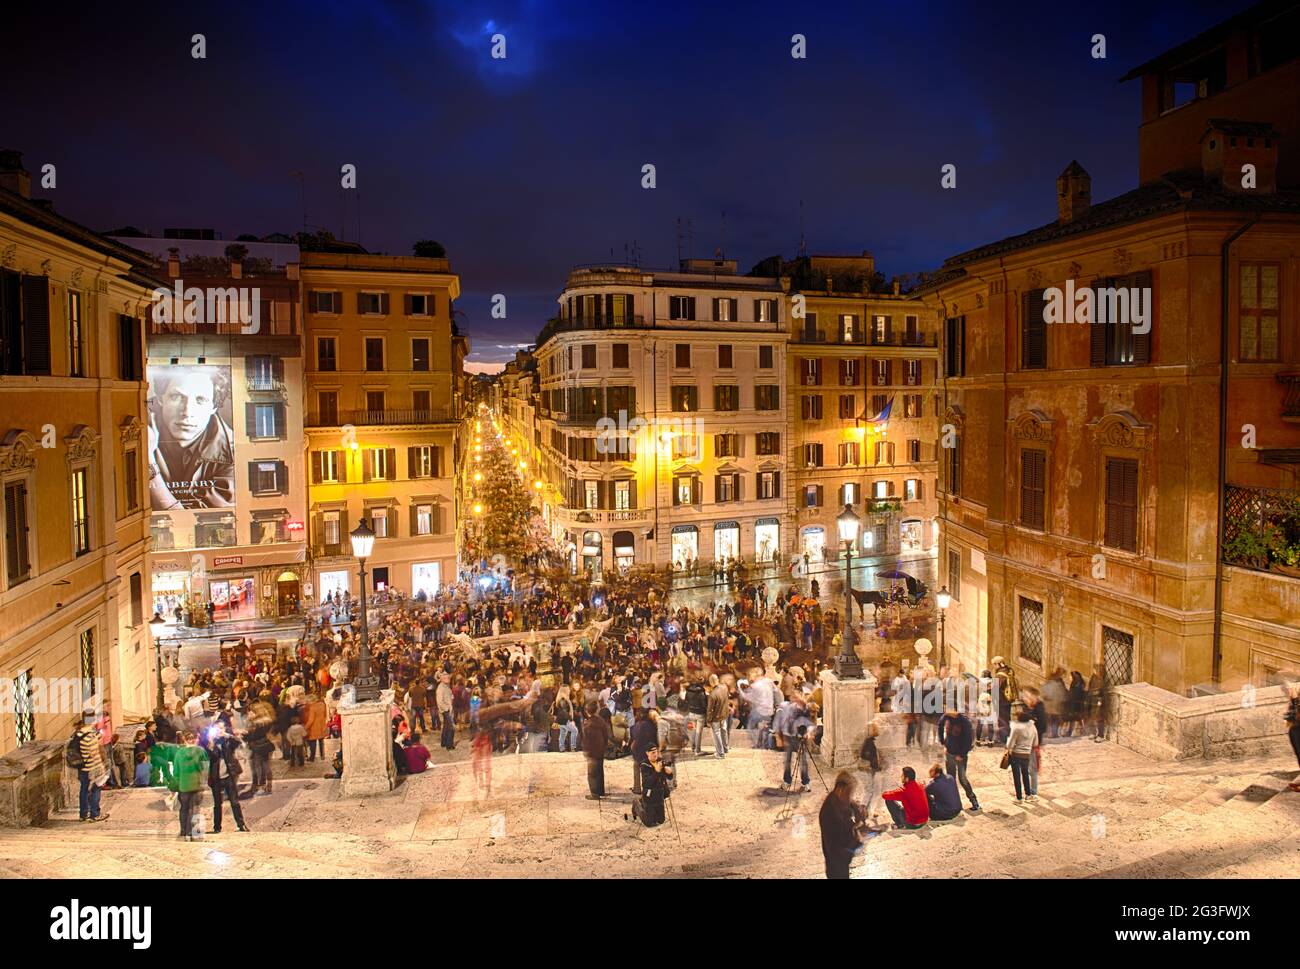 ROME - NOV 3: People climb the spanish steps of Piazza di Spagna on the evening of November 3, 2012 in Rome. The 'scalinata' is Stock Photo